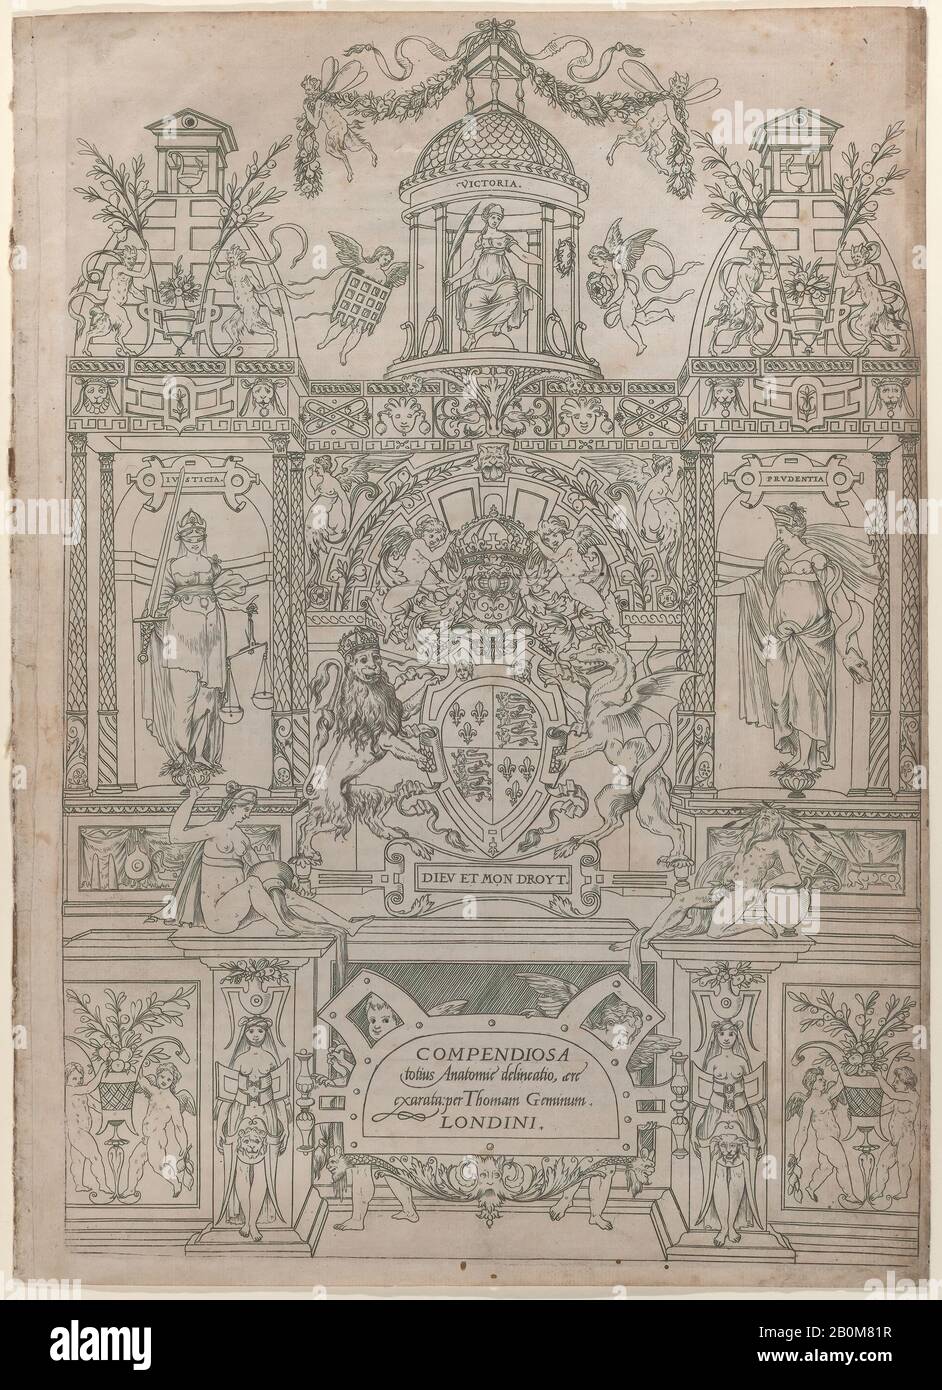 Thomas Geminus, Title Page and Dedication for the 'Compendiosa totius Anatomiae delineatio', Thomas Geminus (Netherlandish, active London, 1515–1562), Related to Andreas Vesalius (Flemish, Brussels 1514–1564 Zakynthos, Greece), 1545, Engraving and letterpress, Sheet: 14 11/16 × 10 9/16 in. (37.3 × 26.8 cm), Prints Stock Photo